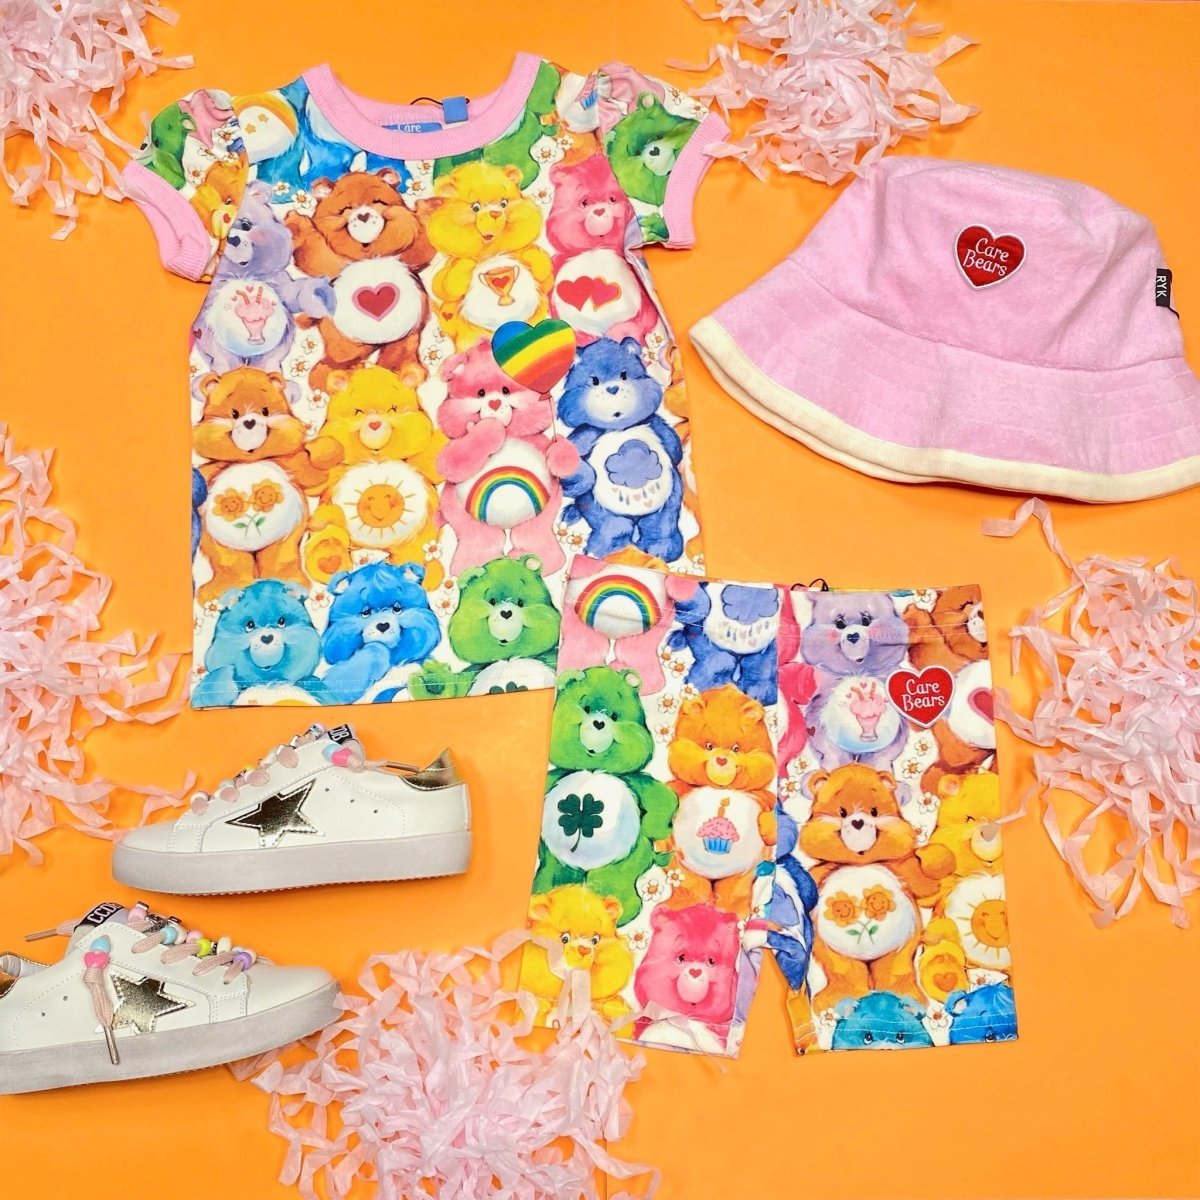 CARE BEARS LOVE ONE ANOTHER BIKER SHORTS - SHORTS